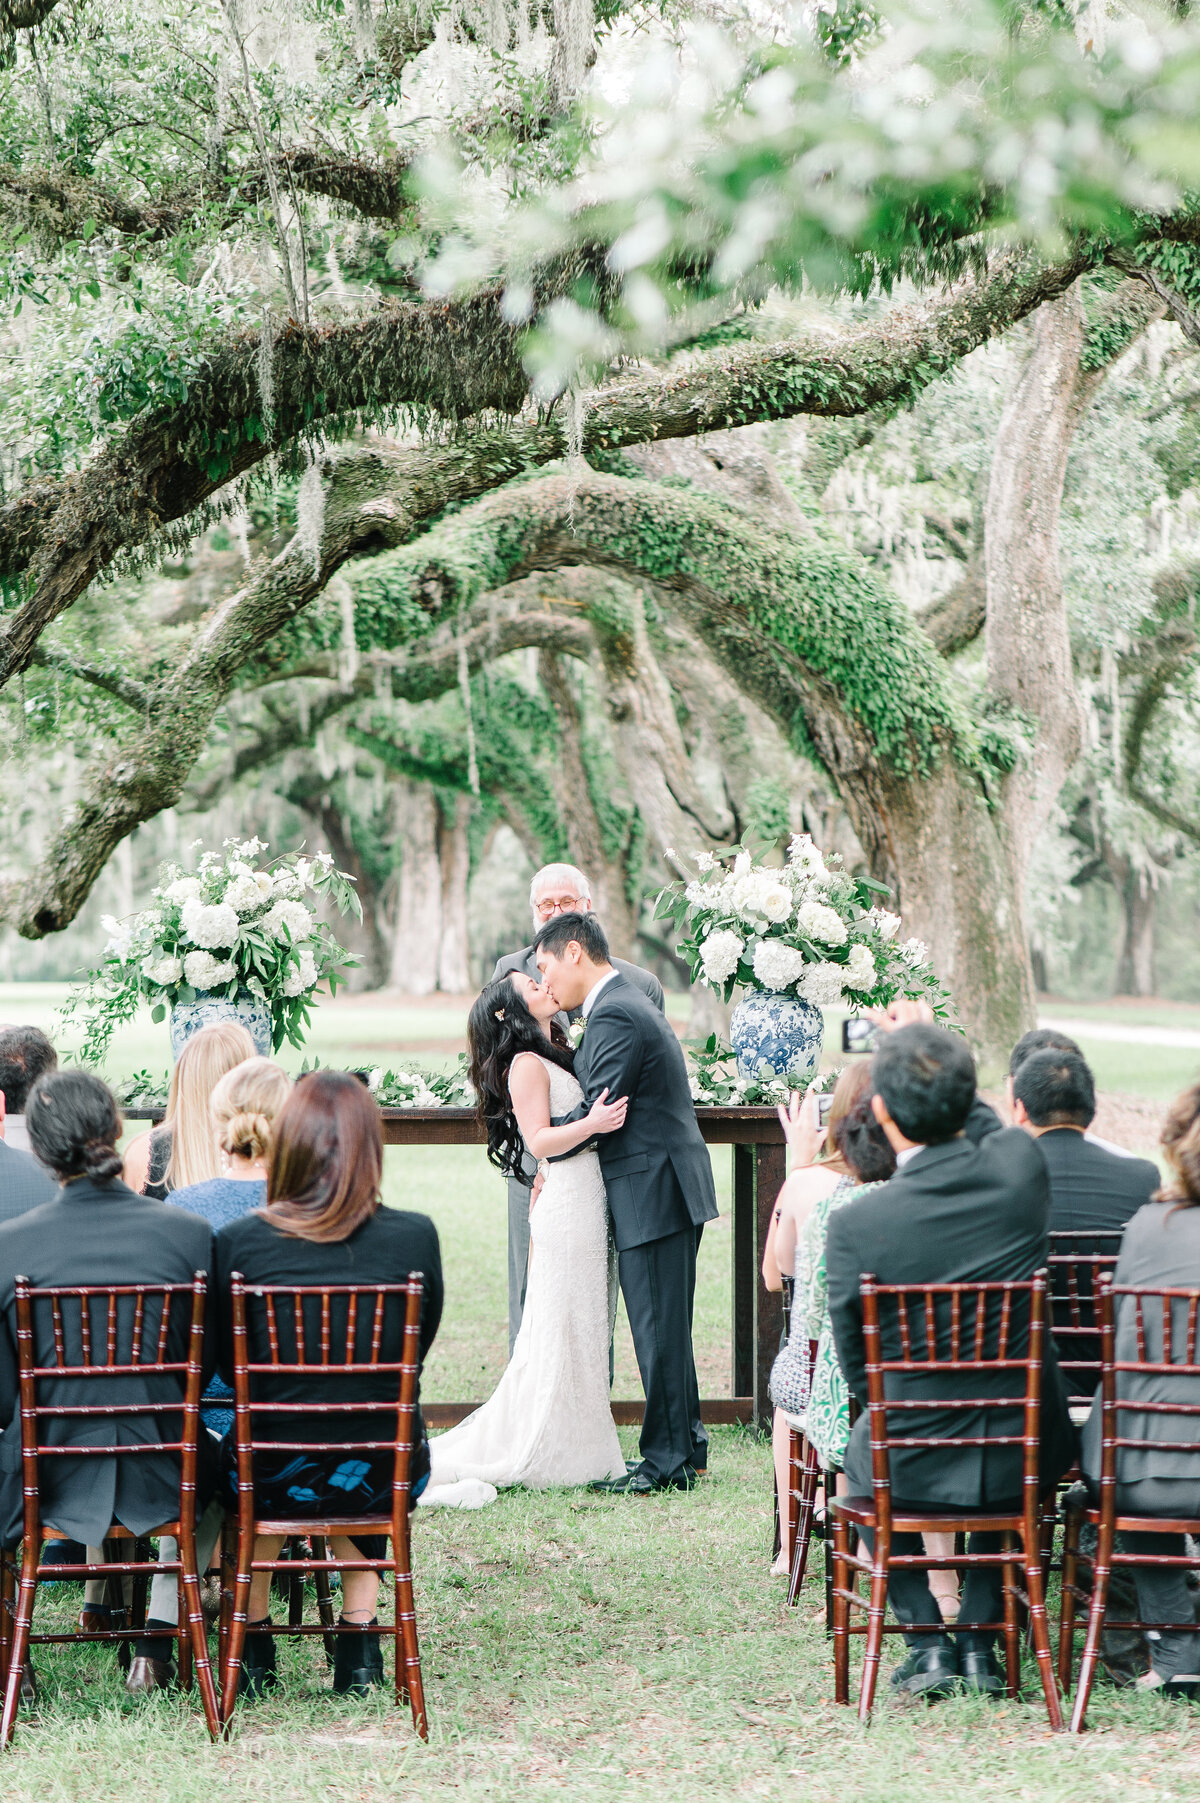 Charleston Elopement Planners | Intimate and Romantic Elopements with Styled Elopements ™ by Pure Luxe Bride